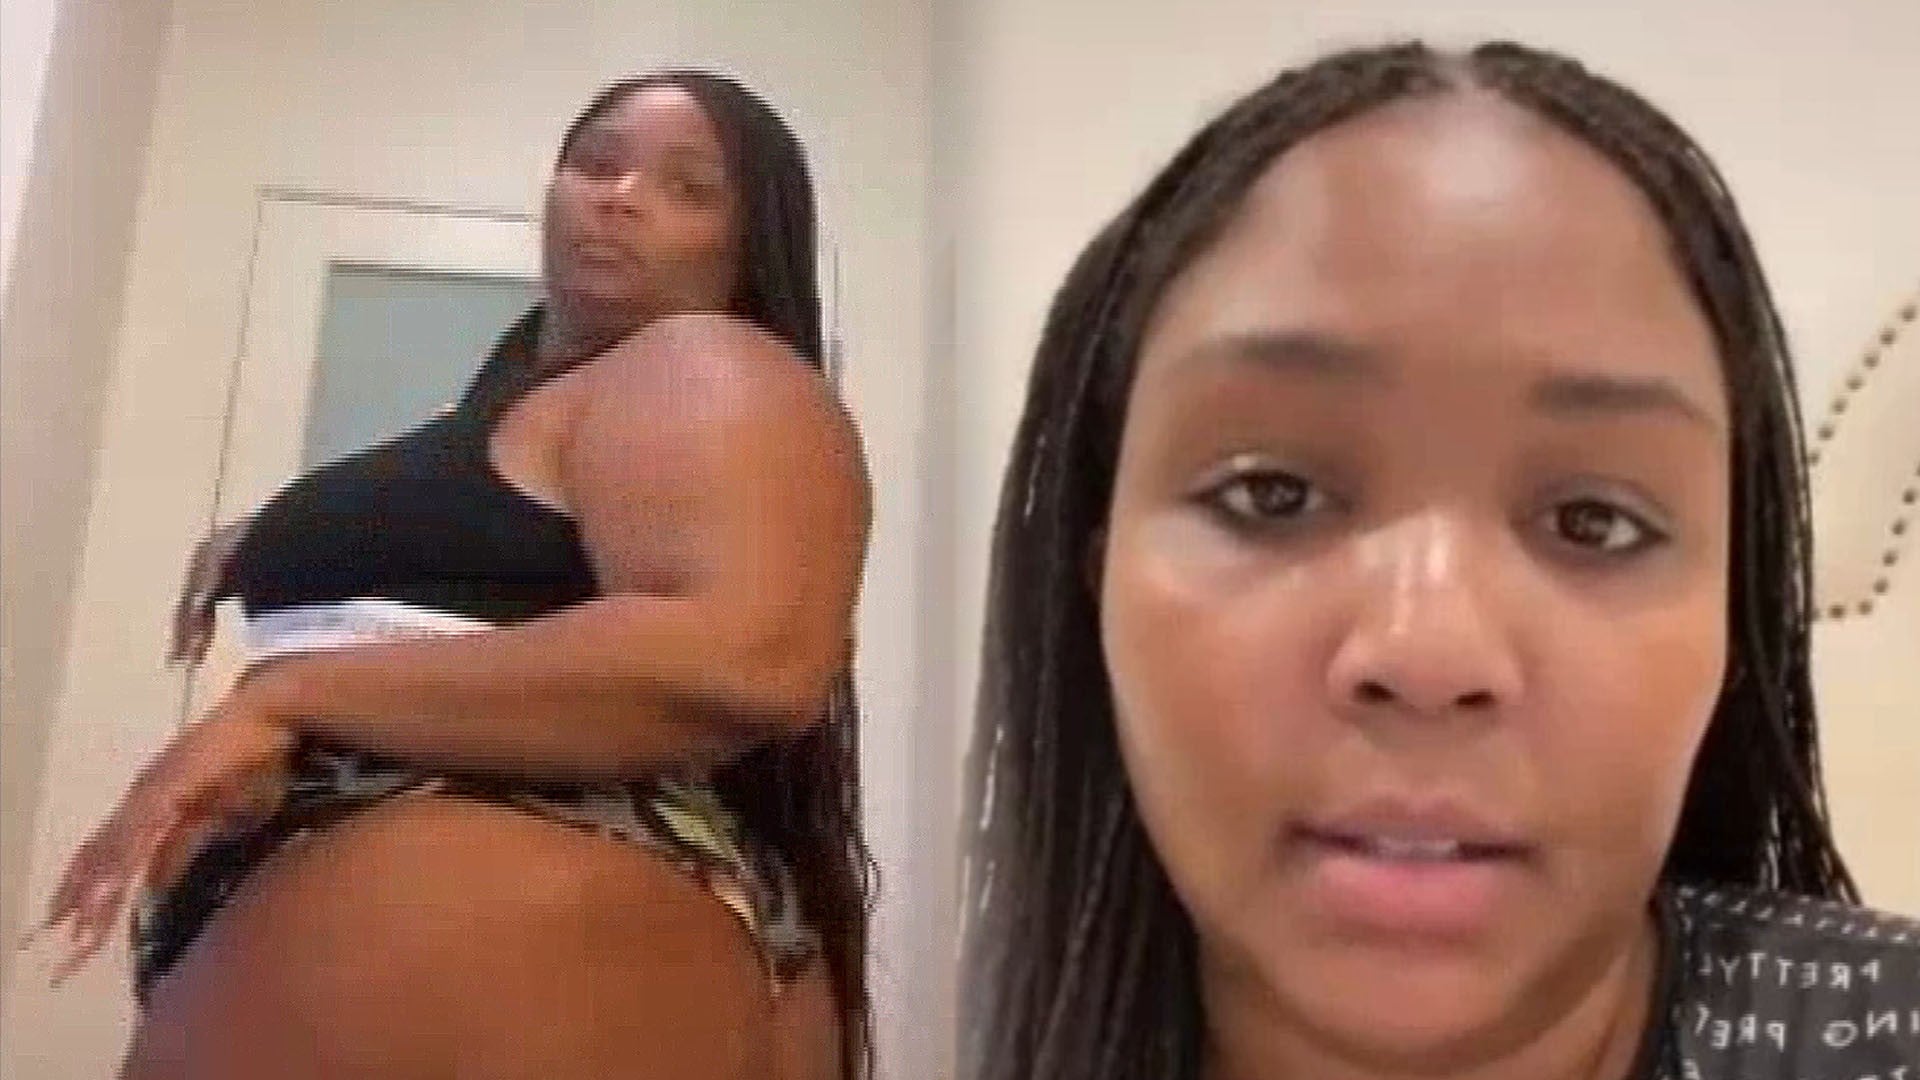 Lizzo Gets Candid on the Struggle of Hating Her Body in Emotional TikTok Videos